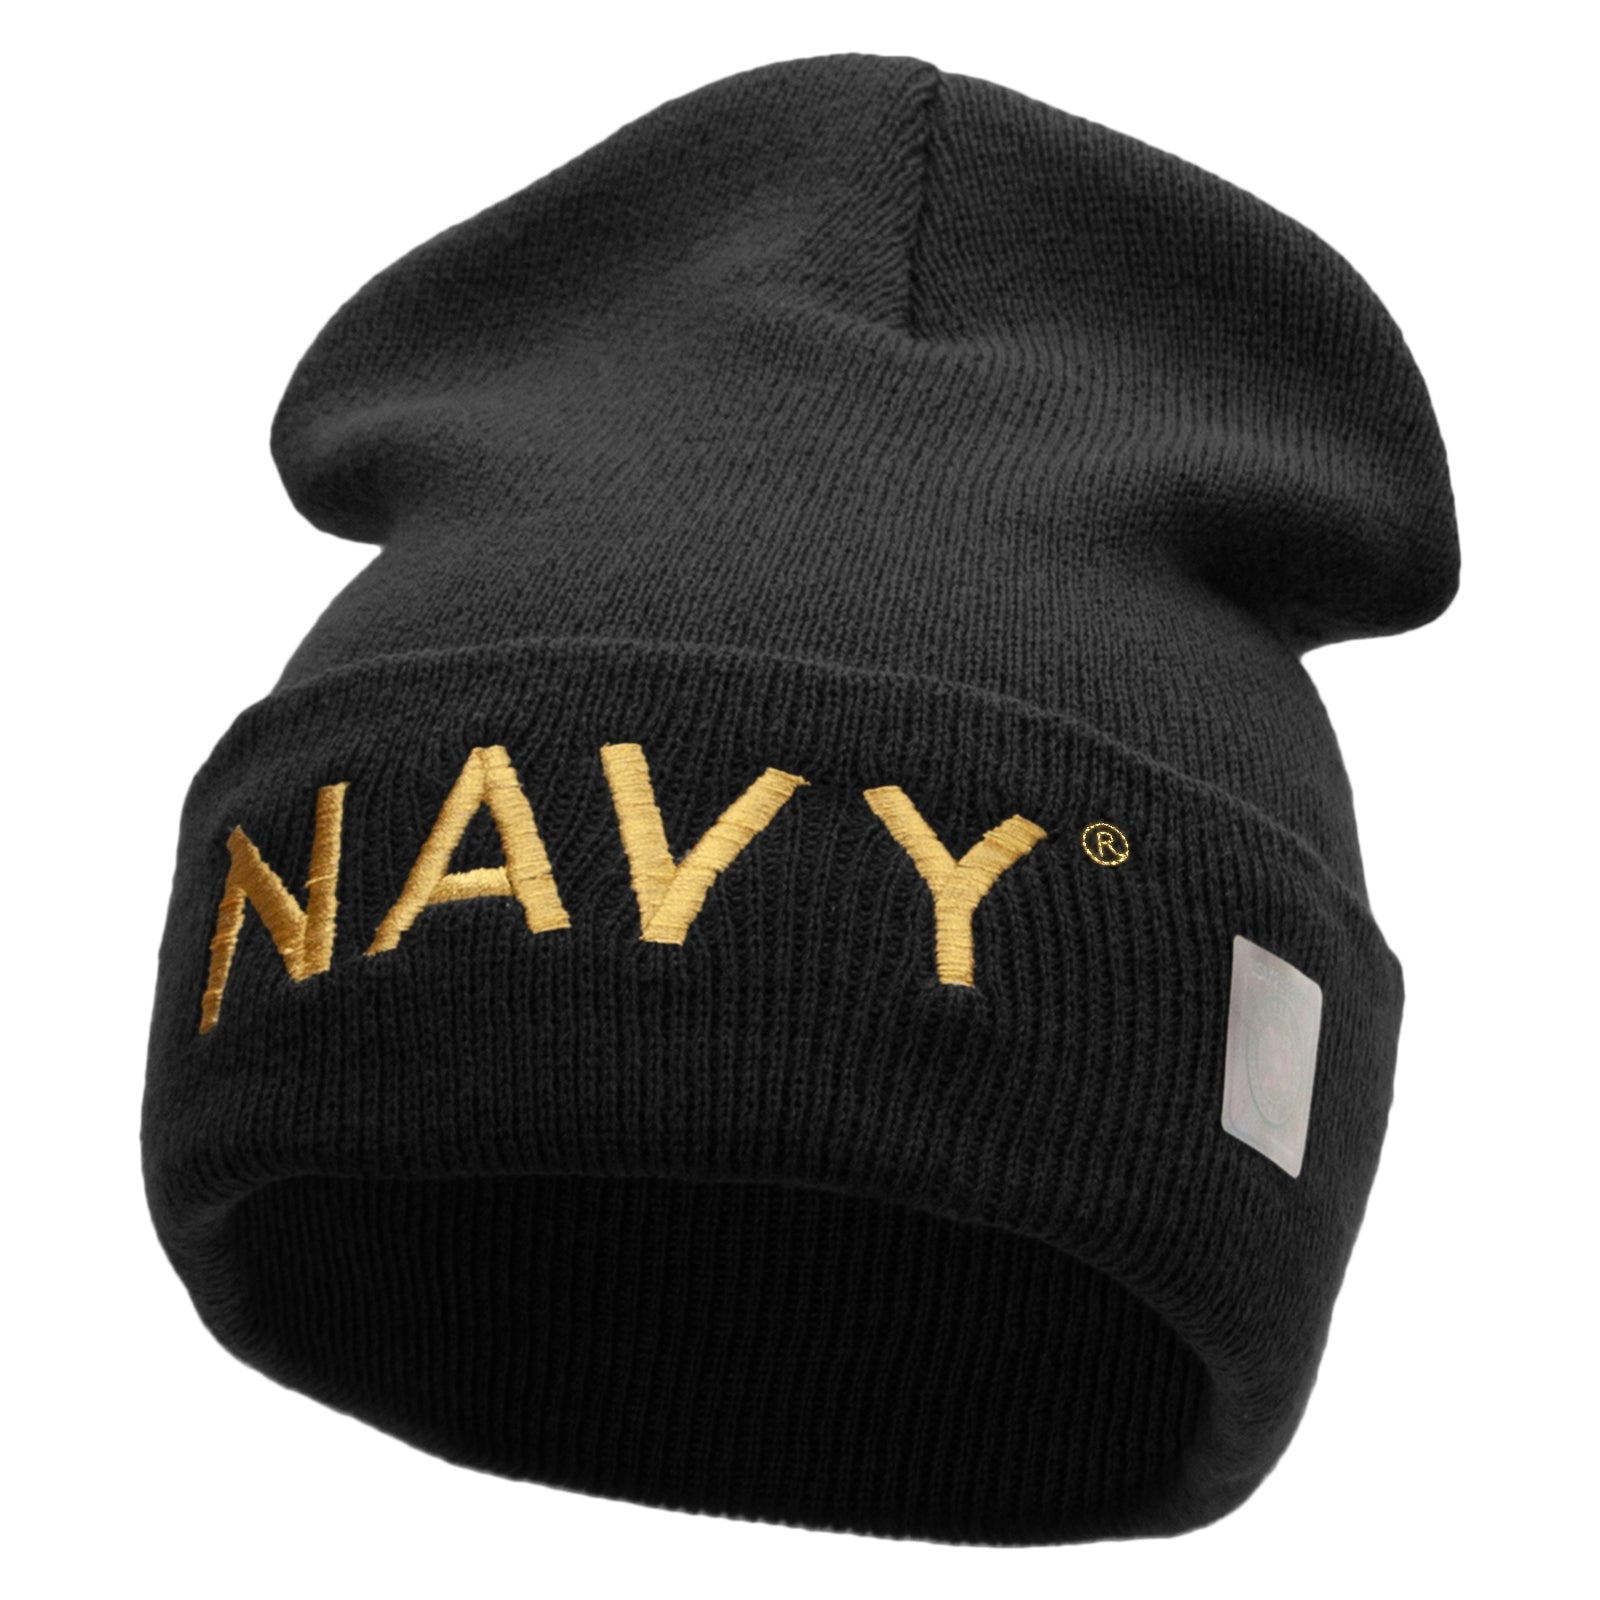 Licensed Navy Word Embroidered Long Beanie Made in USA - Black OSFM